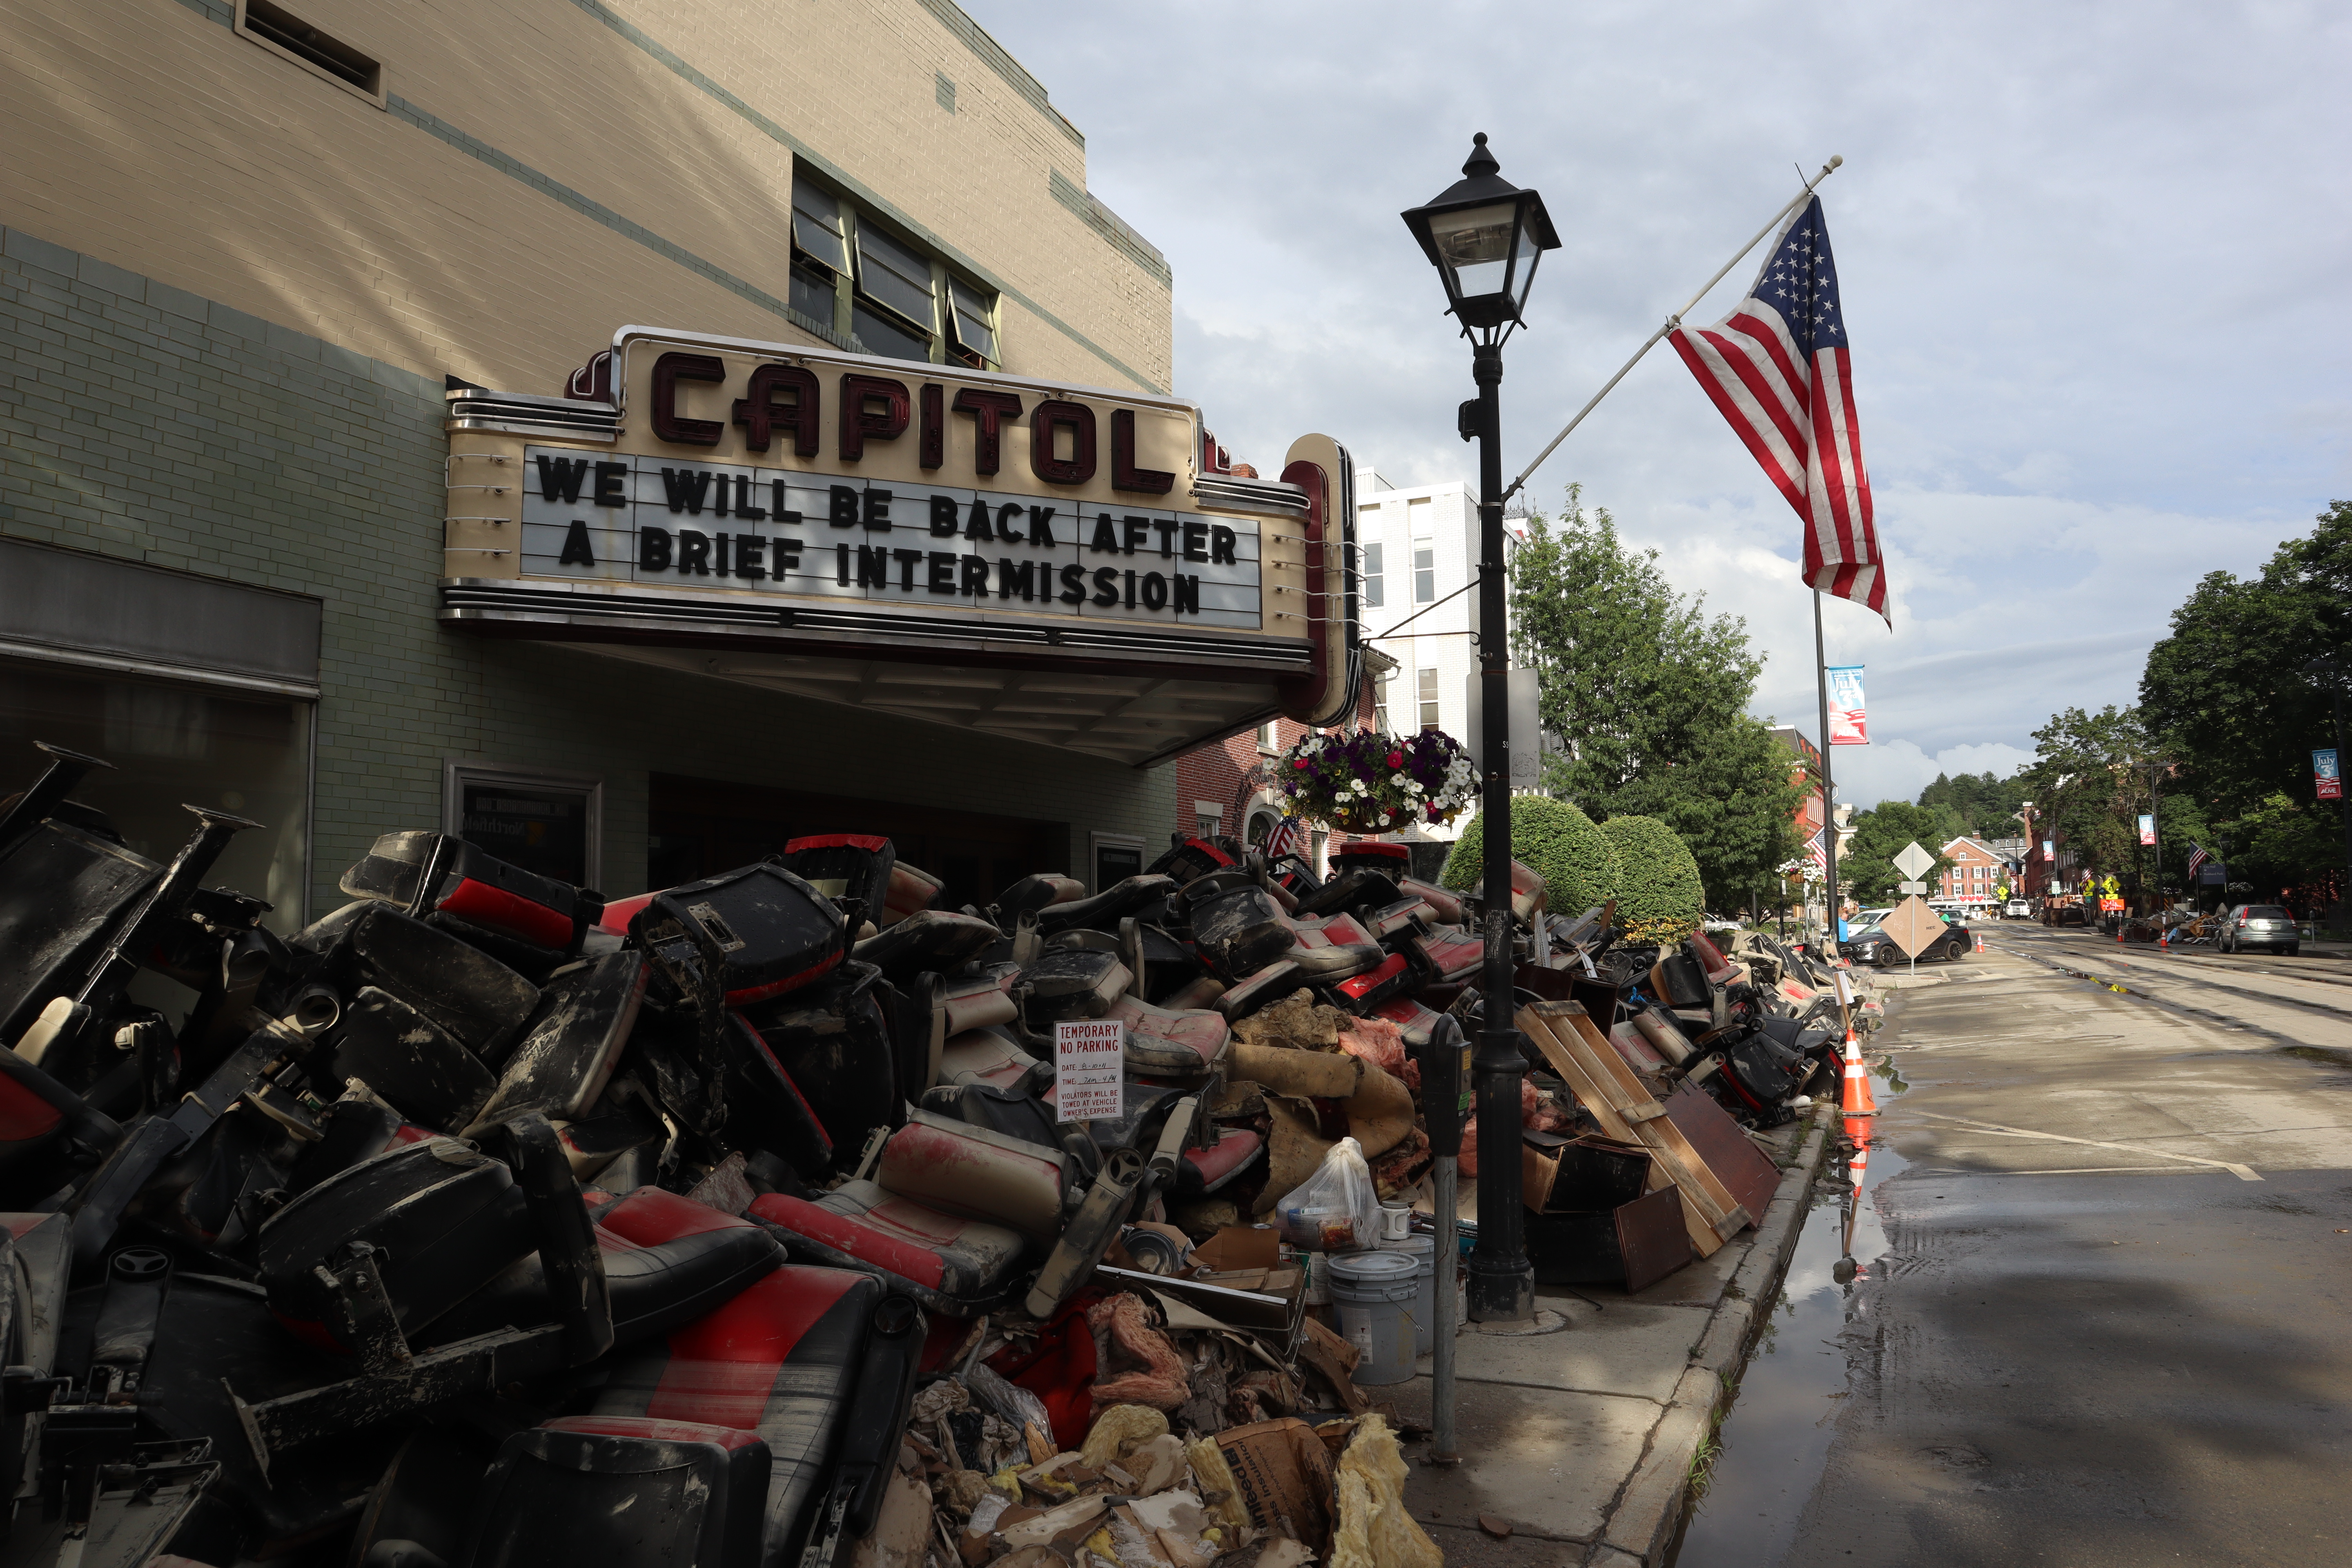 Movie theater with flood debris covering sidewalk in front